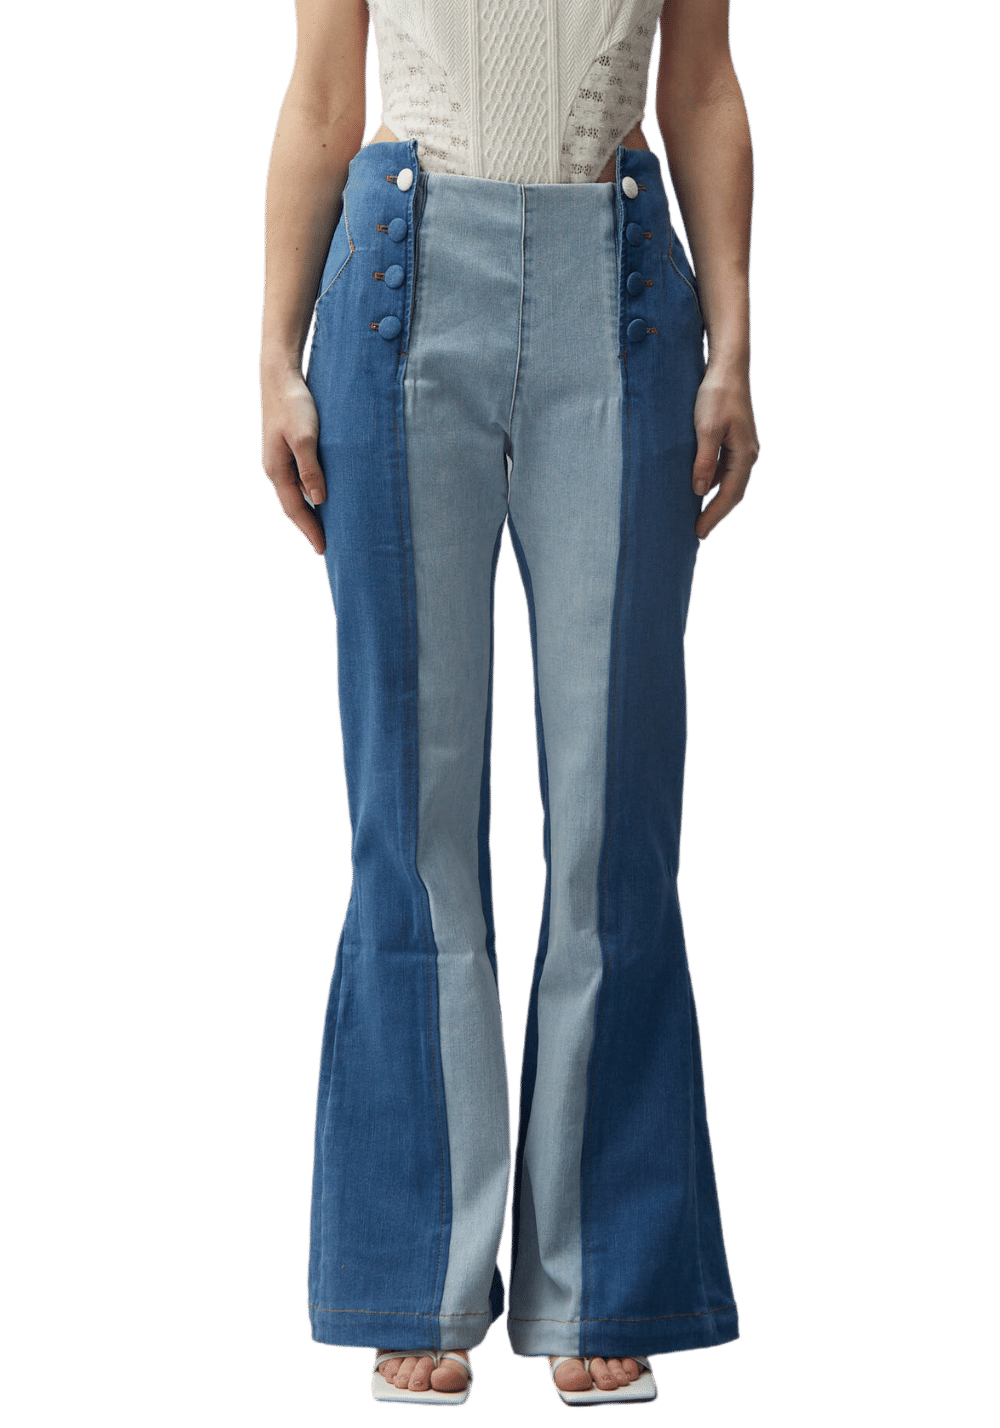 Two Tone Skinny Flared Jean - PSYLOS 1, Two Tone Skinny Flared Jean, Pants, Necessary, PSYLOS 1